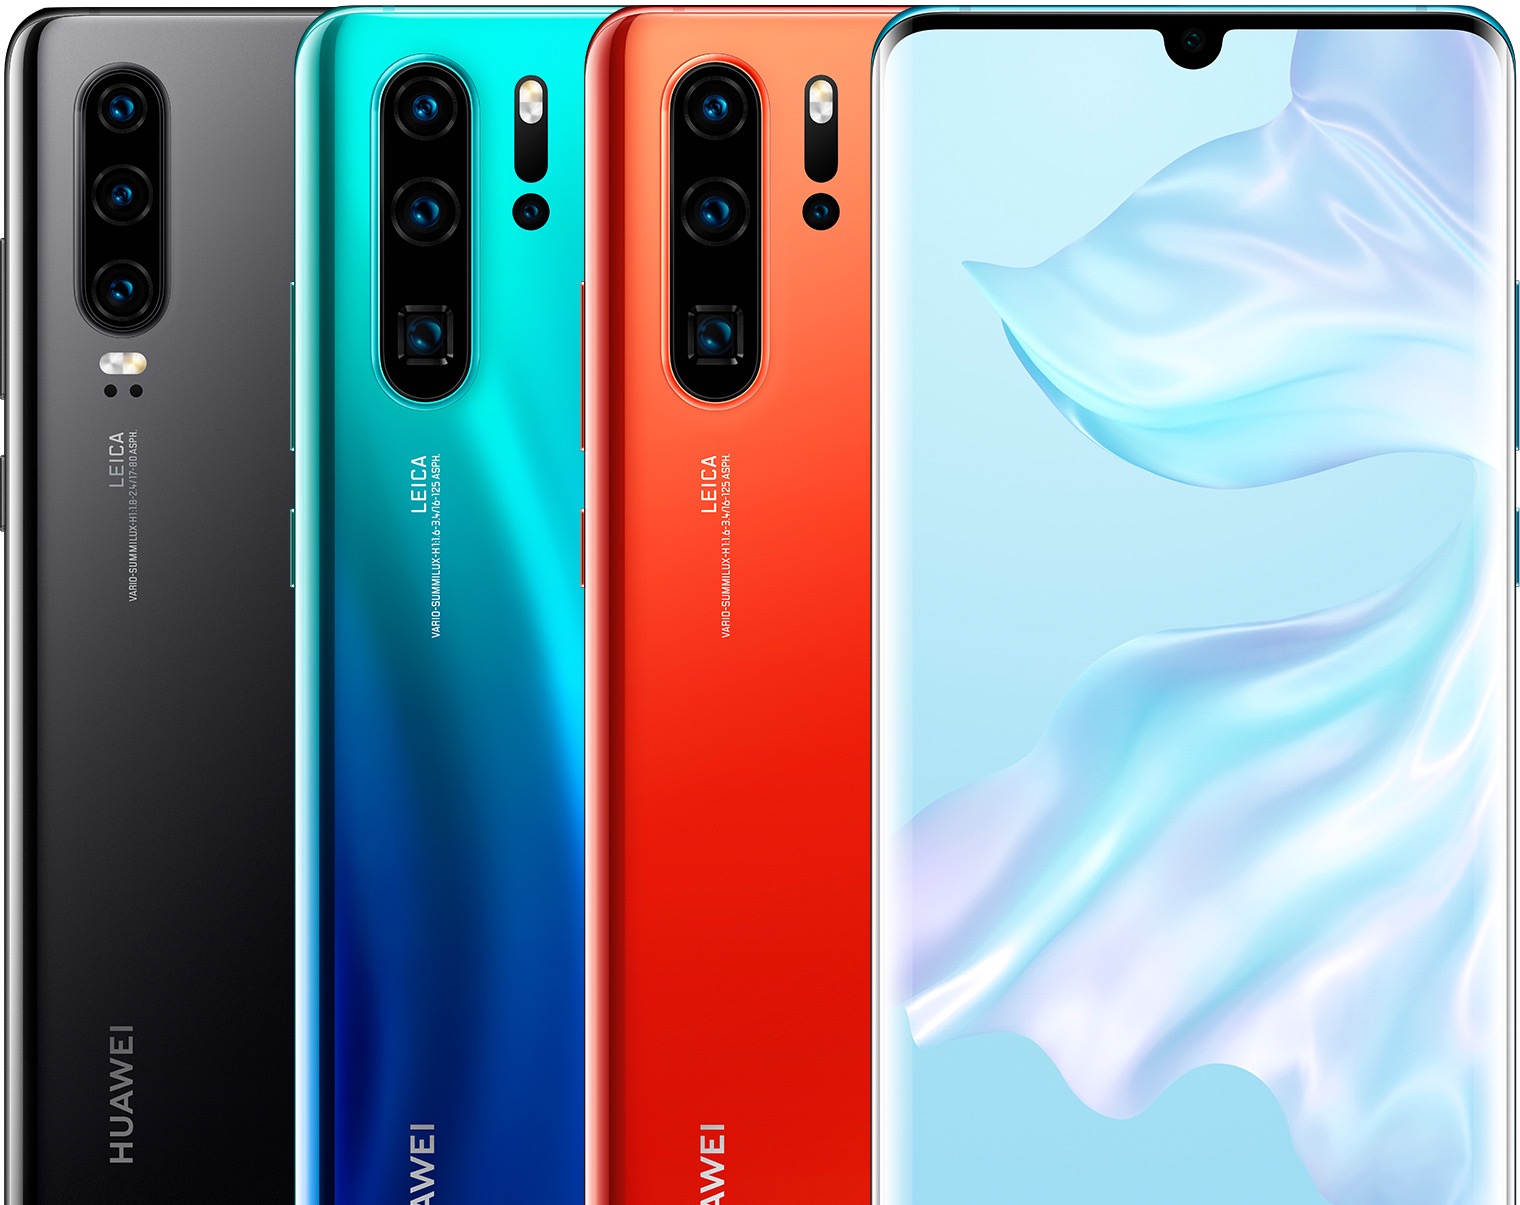 Huawei presents its new P30 and P30 Pro smartphones - this one, with bags ready for Brazil